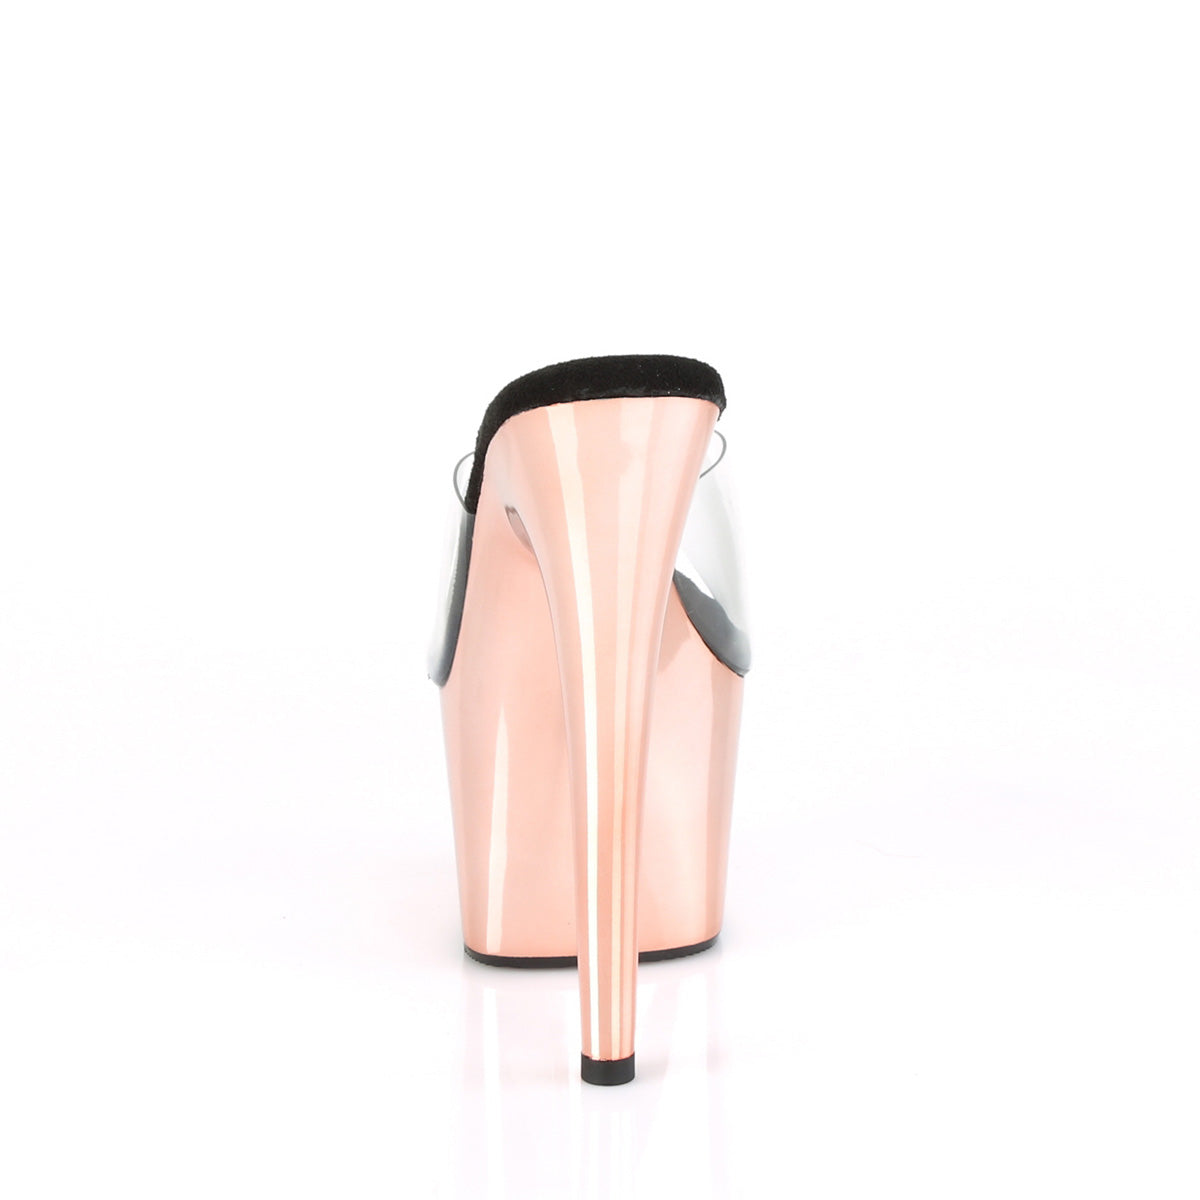 ADORE-701 Clear/Rose Gold Chrome Slide Pleaser